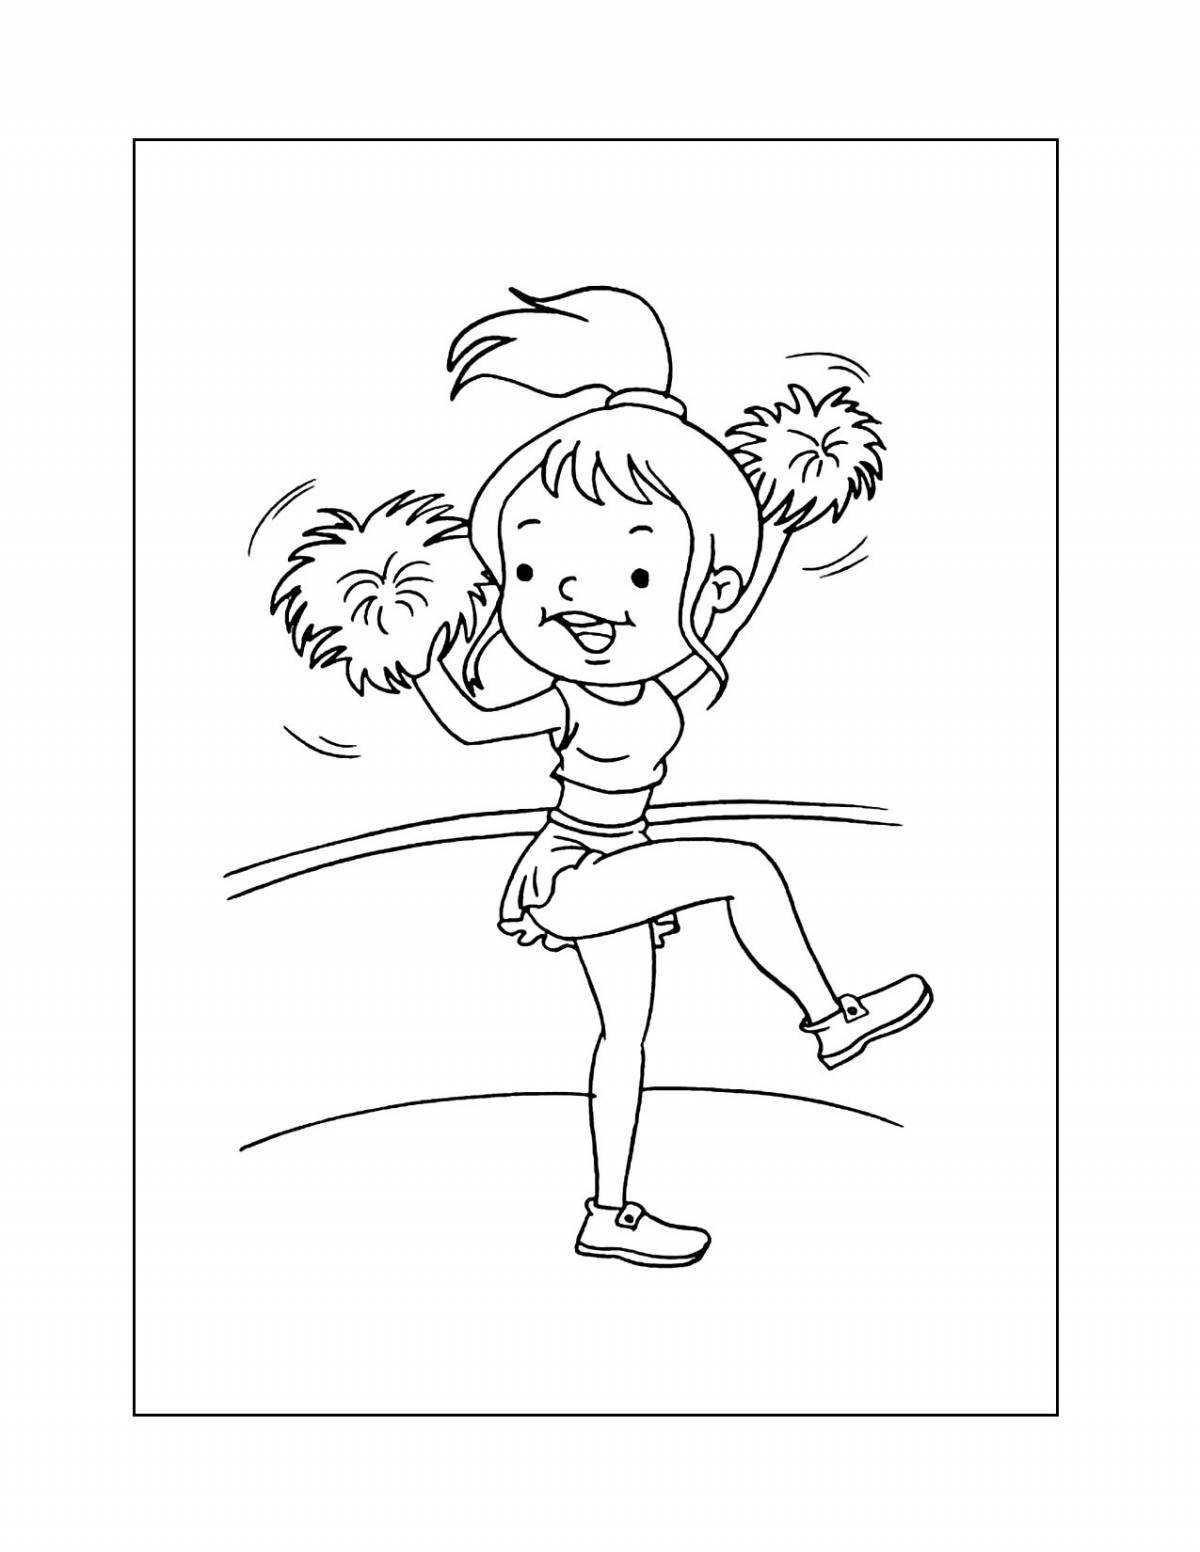 Colorful morning exercise coloring page